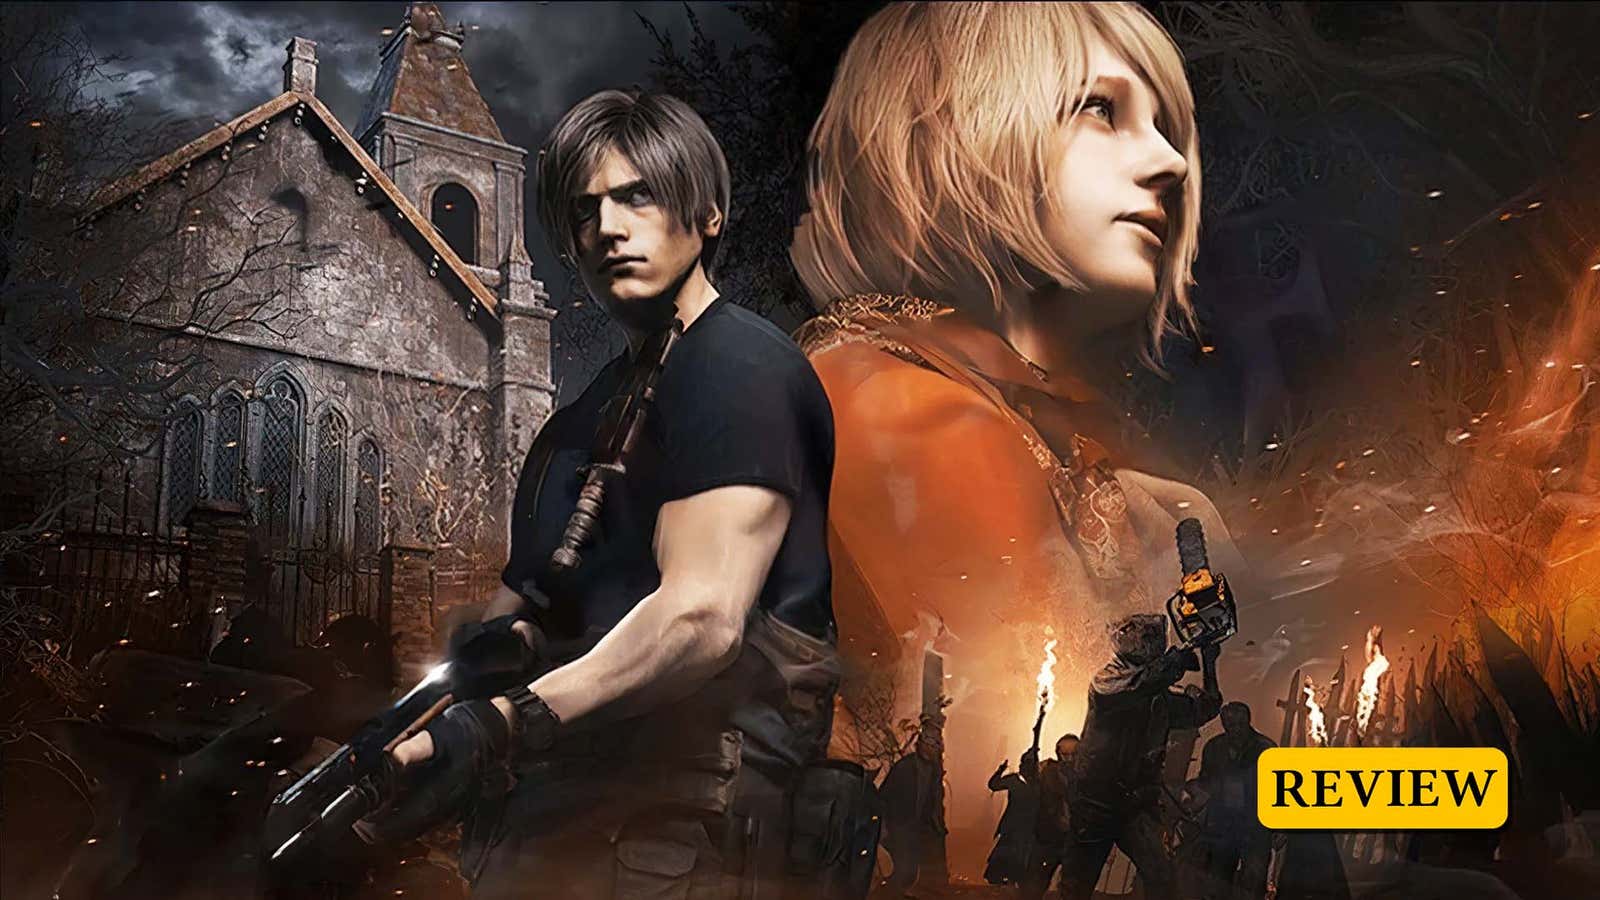 Resident Evil 4 review: exactly how a remake should be done